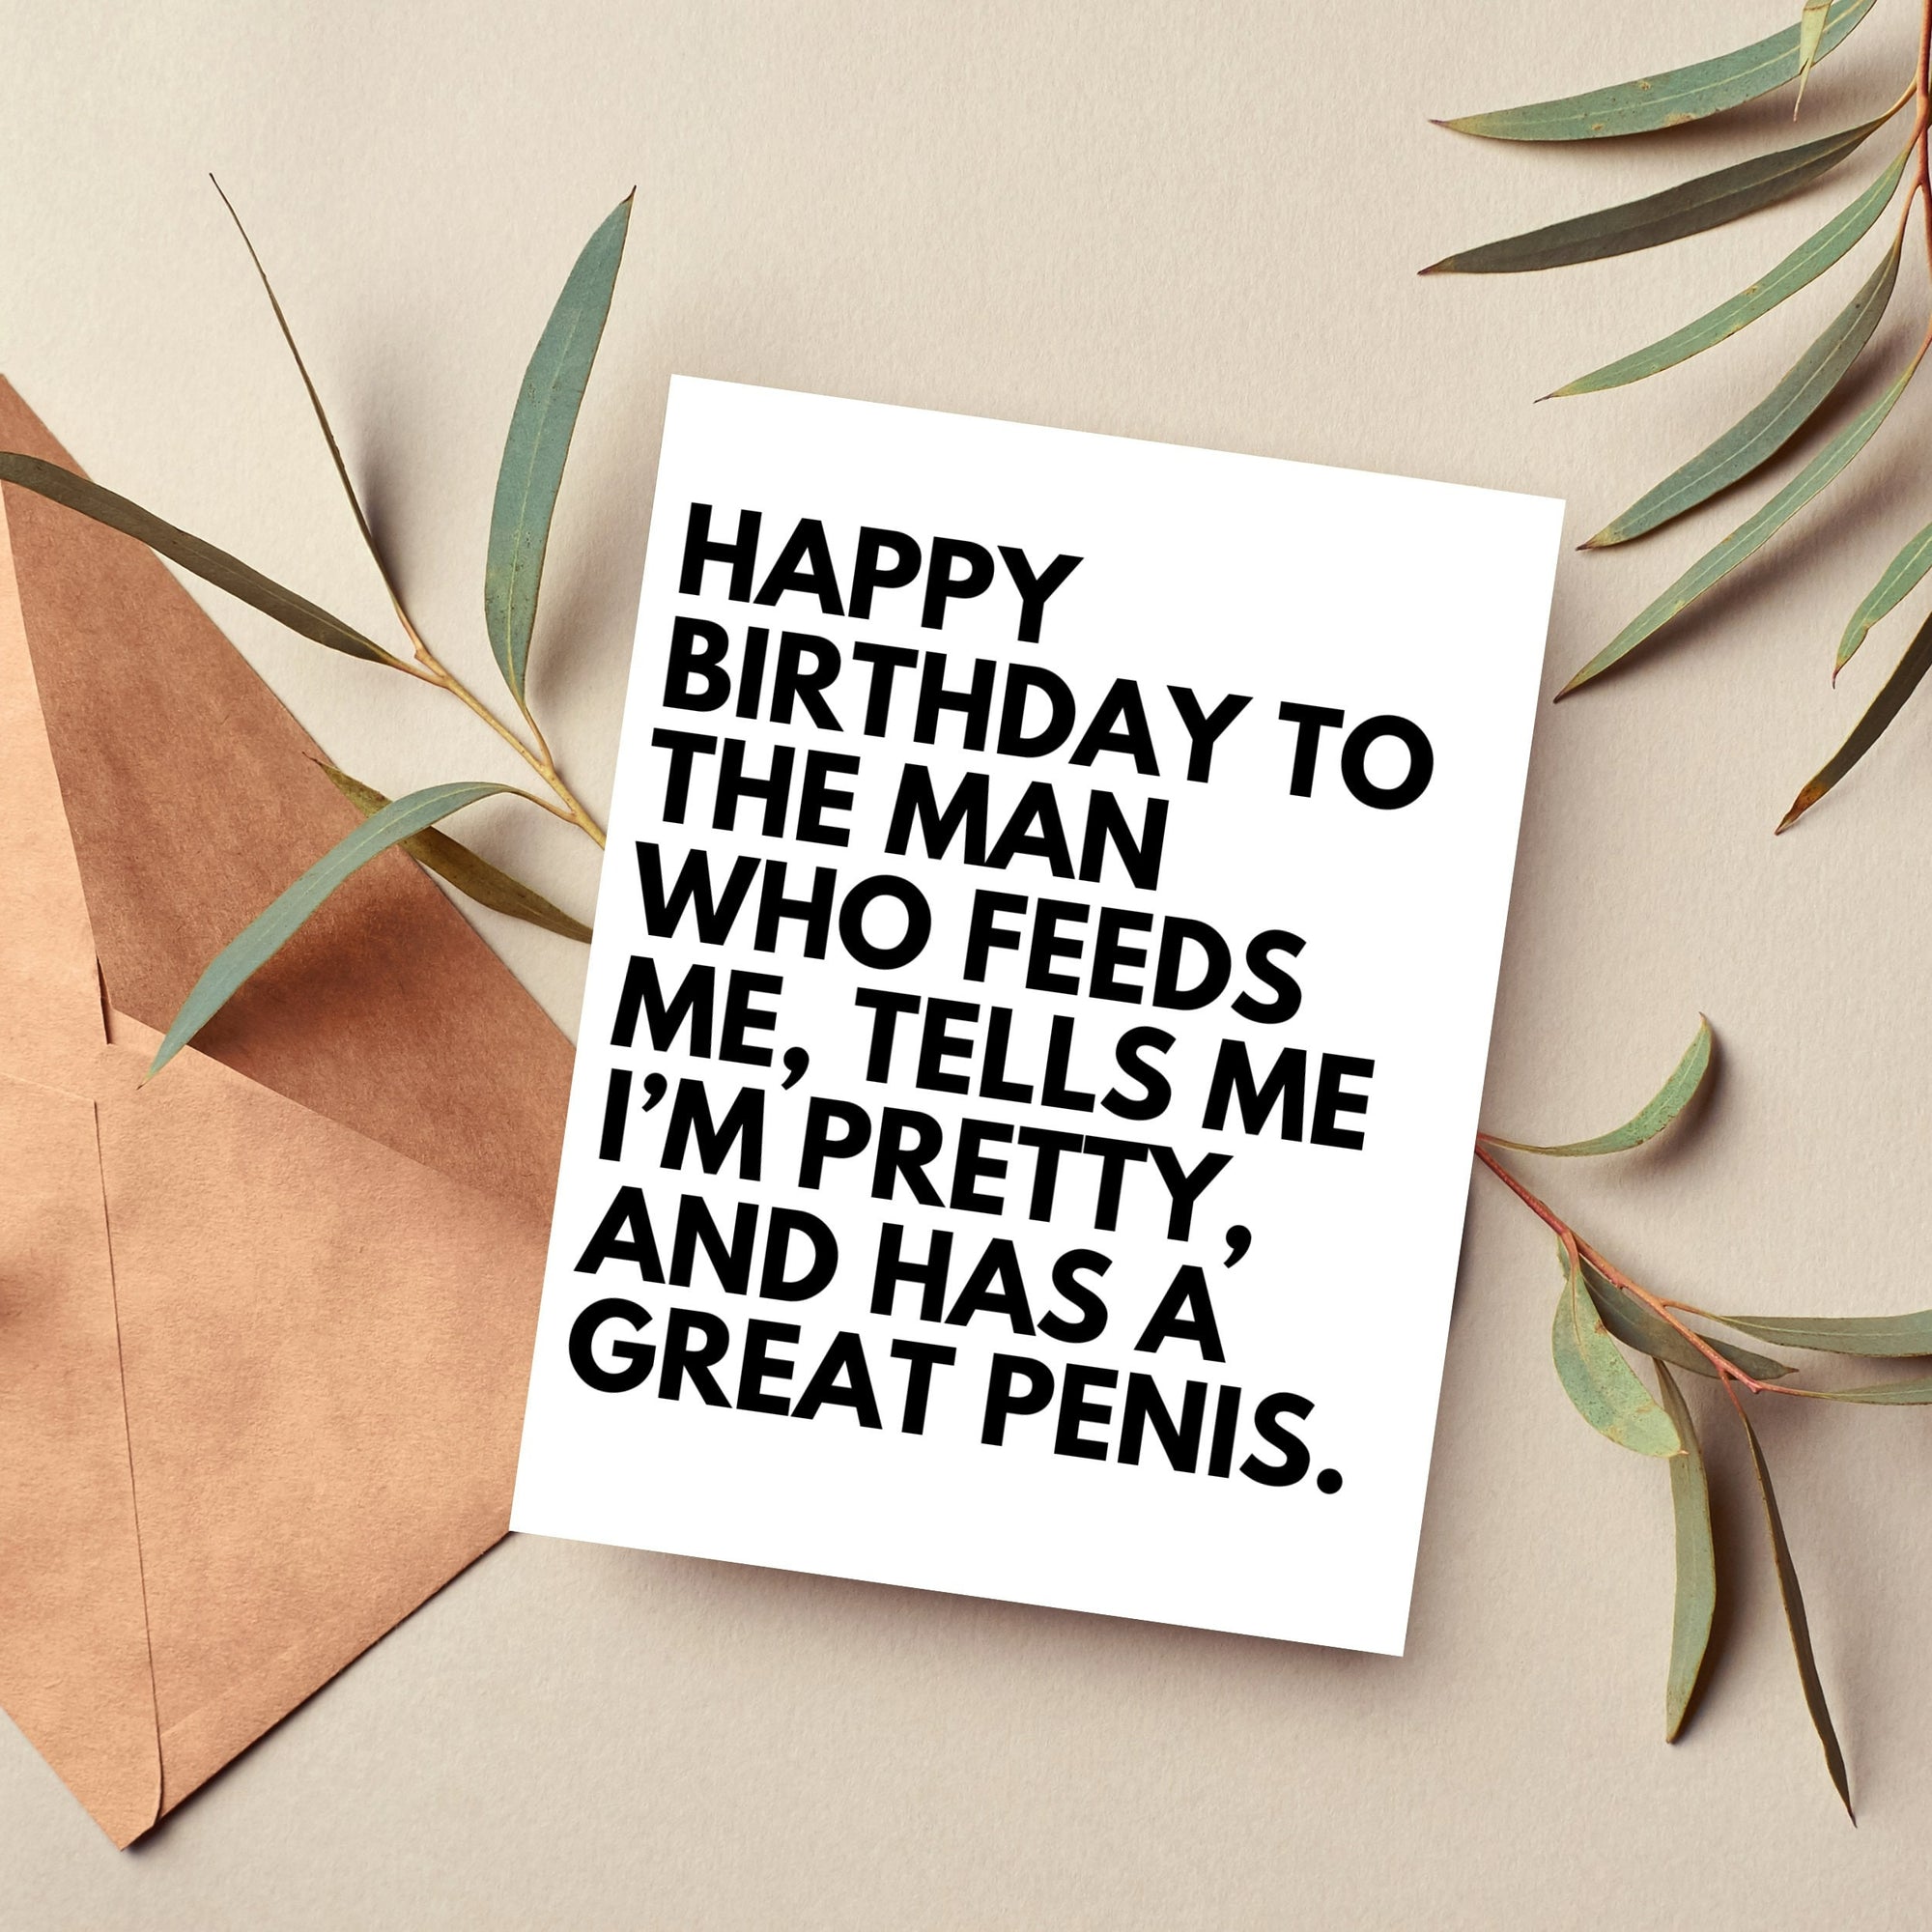 Happy Birthday To The Man Who Feeds Me Card